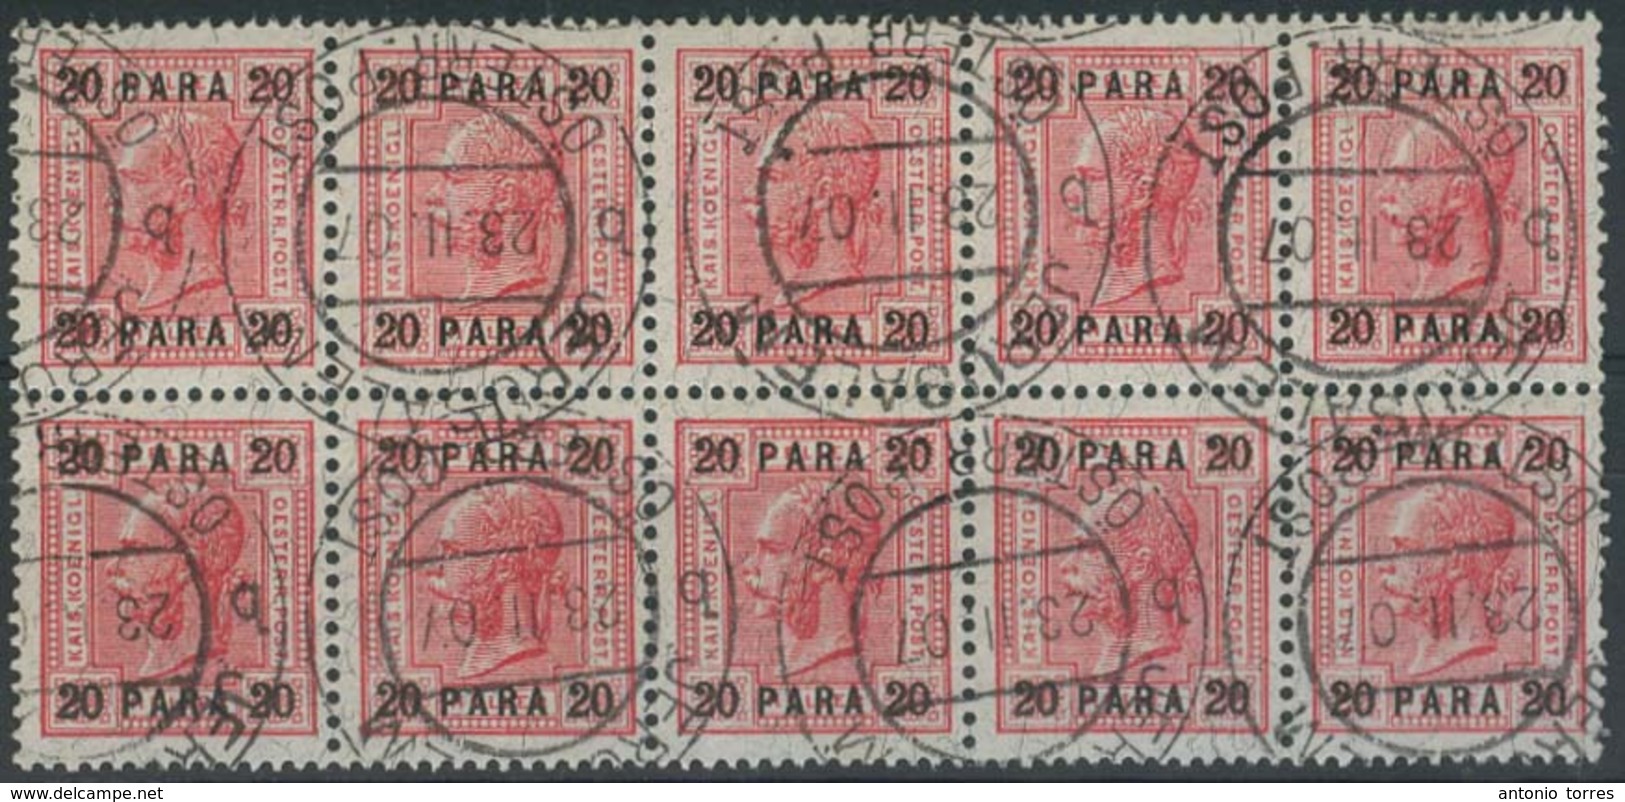 LEBANON. C.1867-1900. Austria PO 12 Stamps / Beyrouth Cancels Diff Types. Some Better Values. Useful Group. - Libano